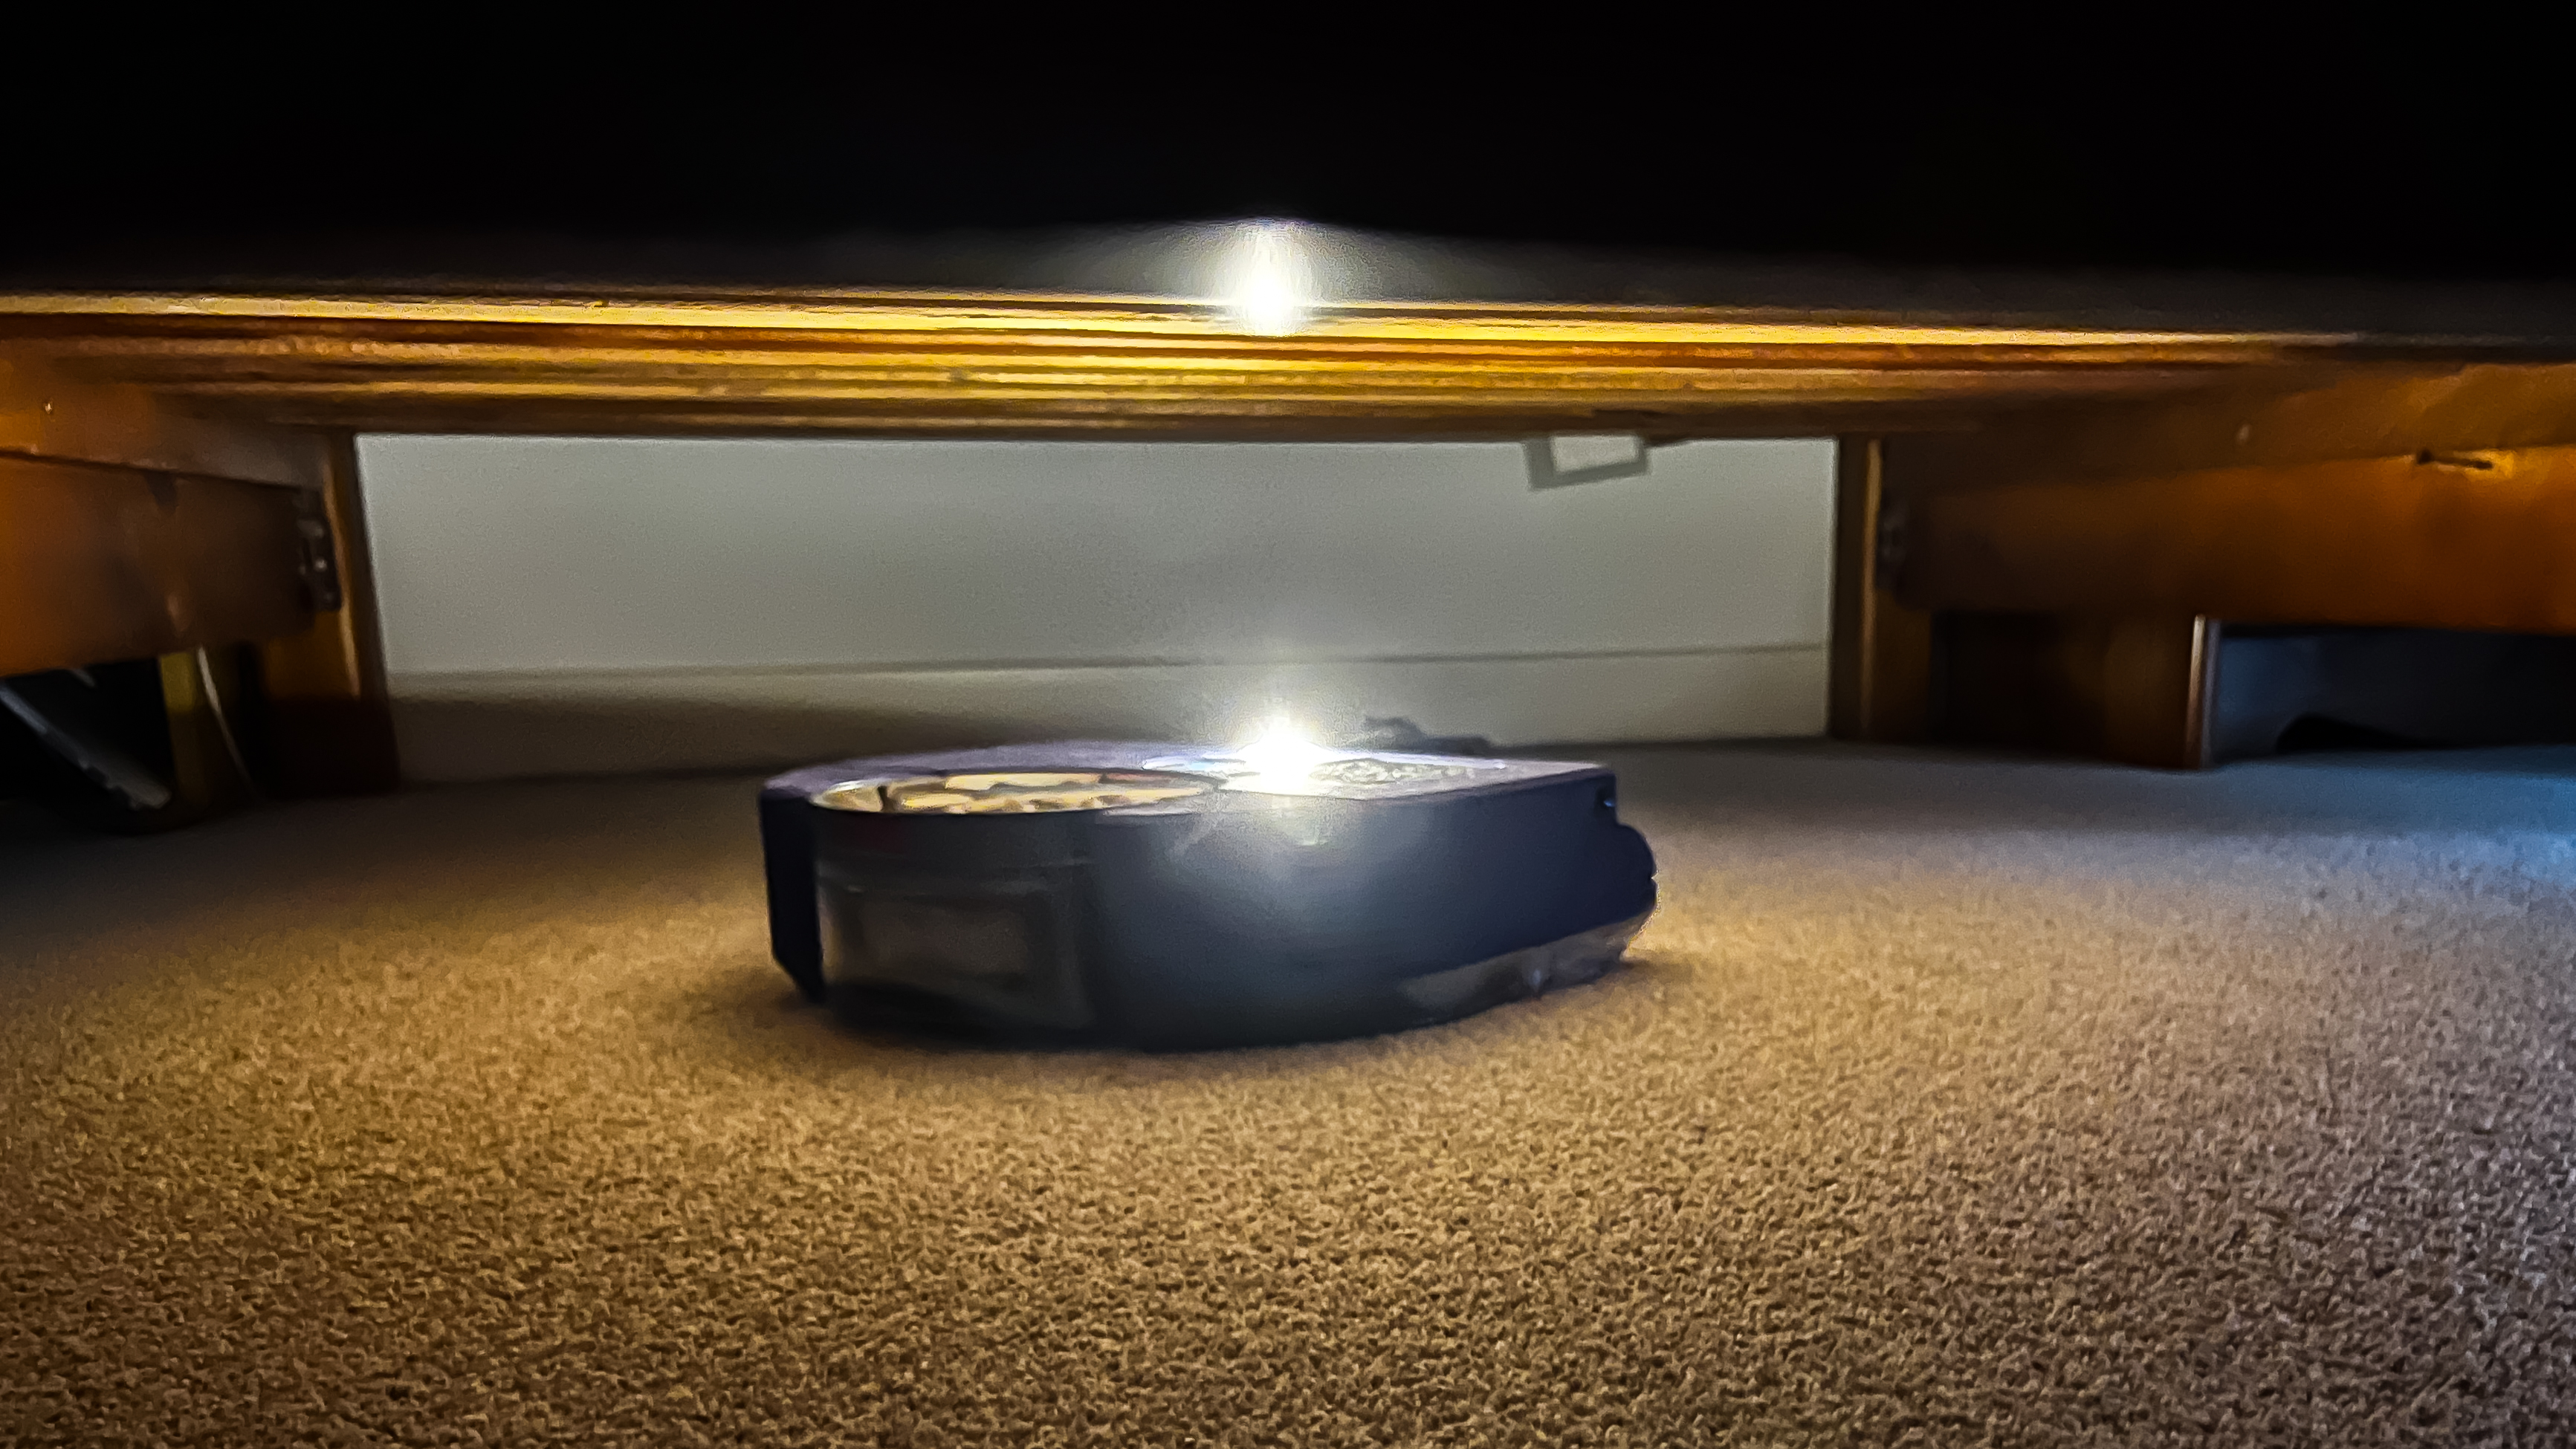 A light comes on when the Dyson 360 Vis Nav is in dark rooms and spaces